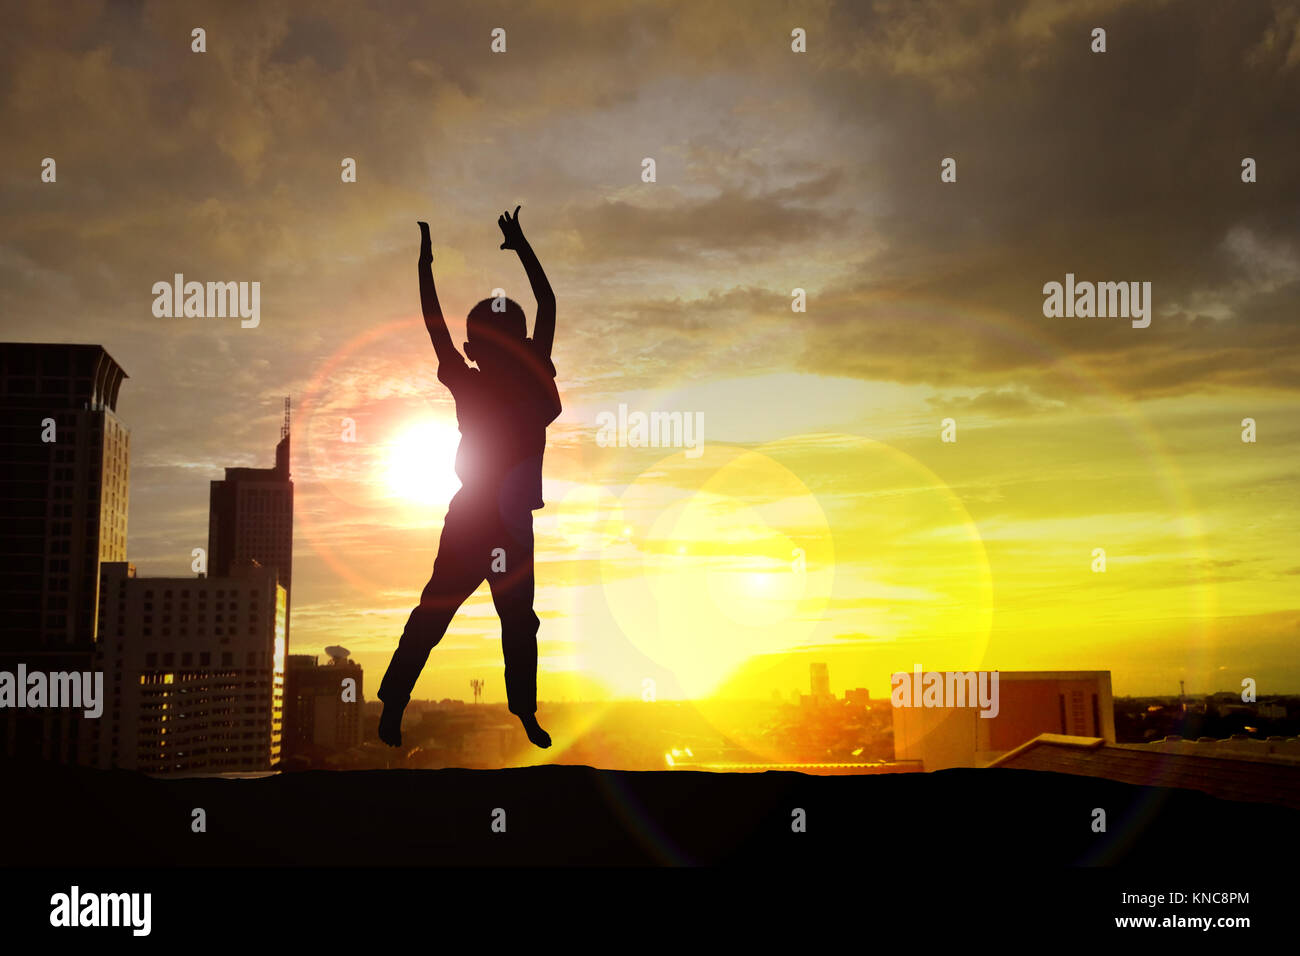 silhouette of happy kid jumping on the building at sunset Stock Photo